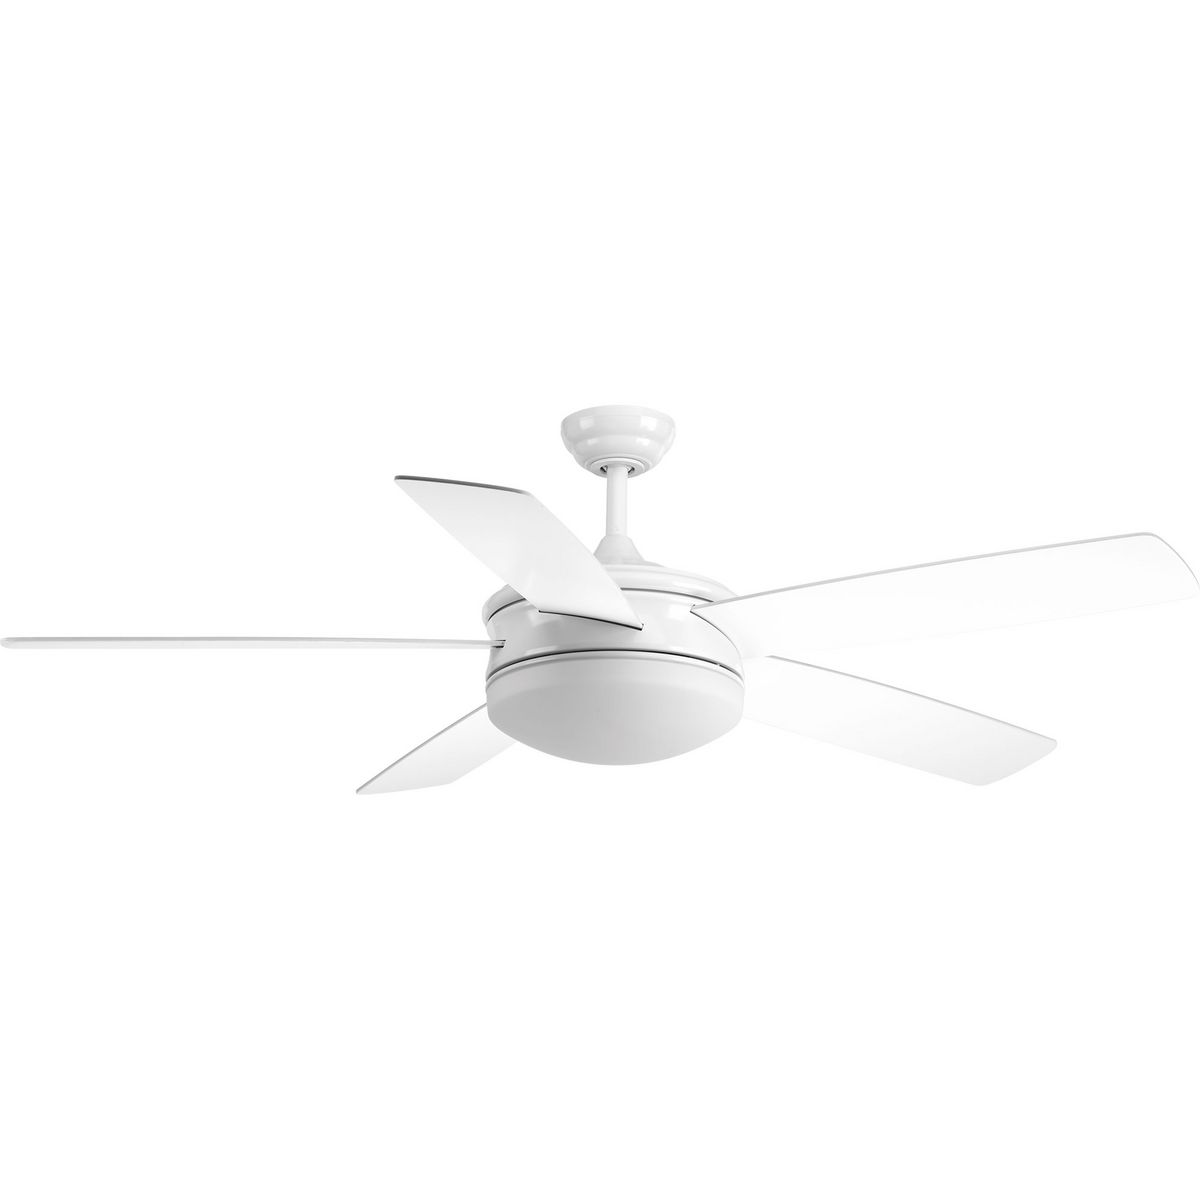 Five-blade 60 inch Fresno ceiling fan features white blades. The LED light source offers both form and function with energy- and cost-savings benefits. A white opal glass shade features an 18W dimmable, 3000K LED module. Full range dimming and remote control with batteries is included. Featuring reversible blades, the fan has a Brushed Nickel finish.